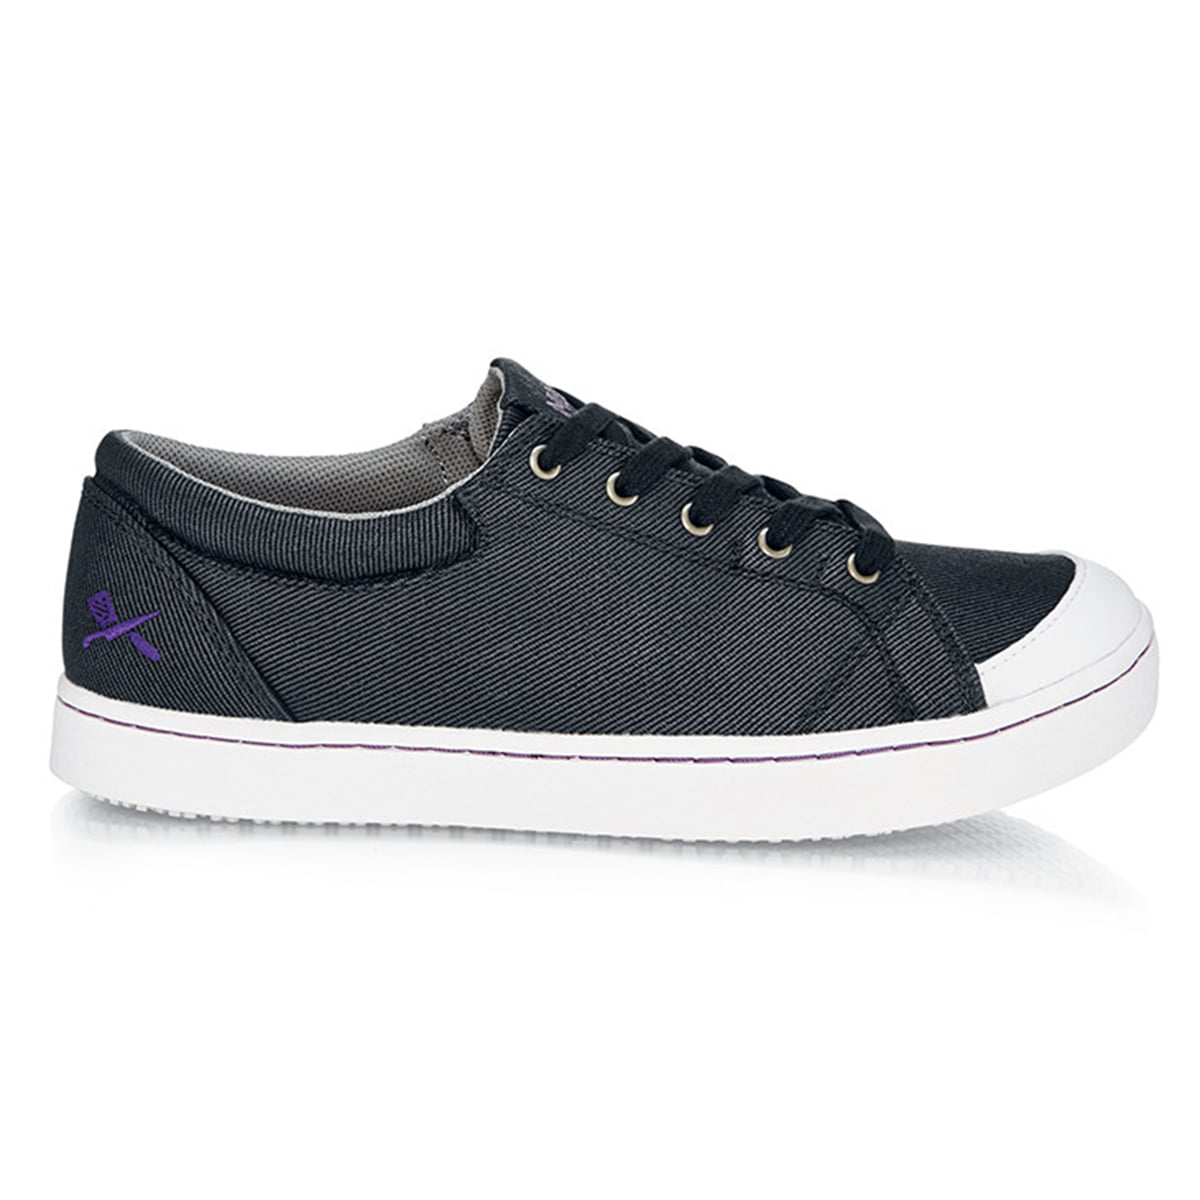 Maven by Mozo for Shoes For Crews are slip-resistant, waterproof trainers, seen from the right.